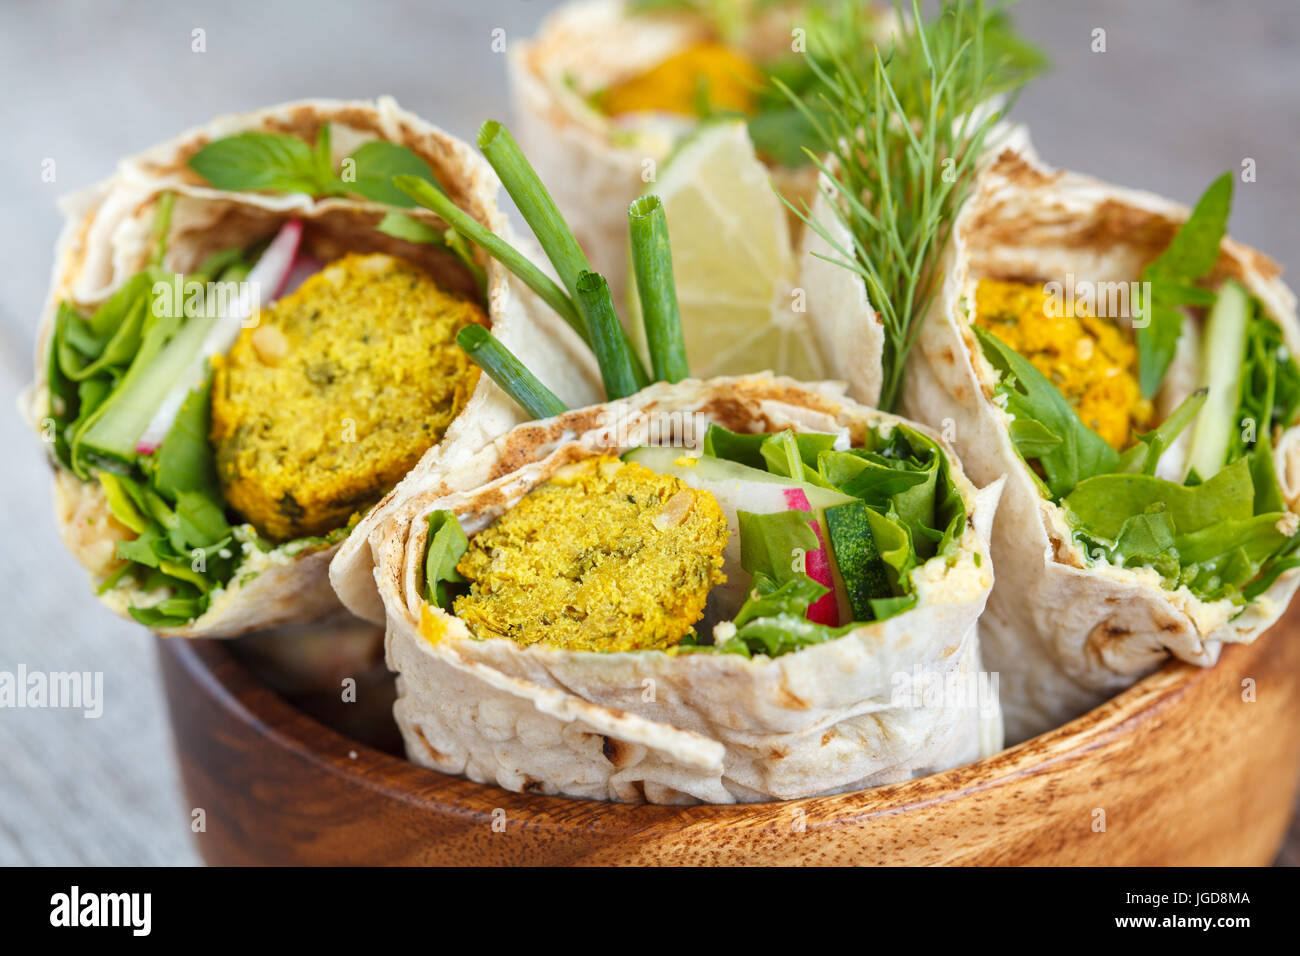 Vegan falafel wraps with salad and hummus. Love for a healthy vegan food concept. Stock Photo